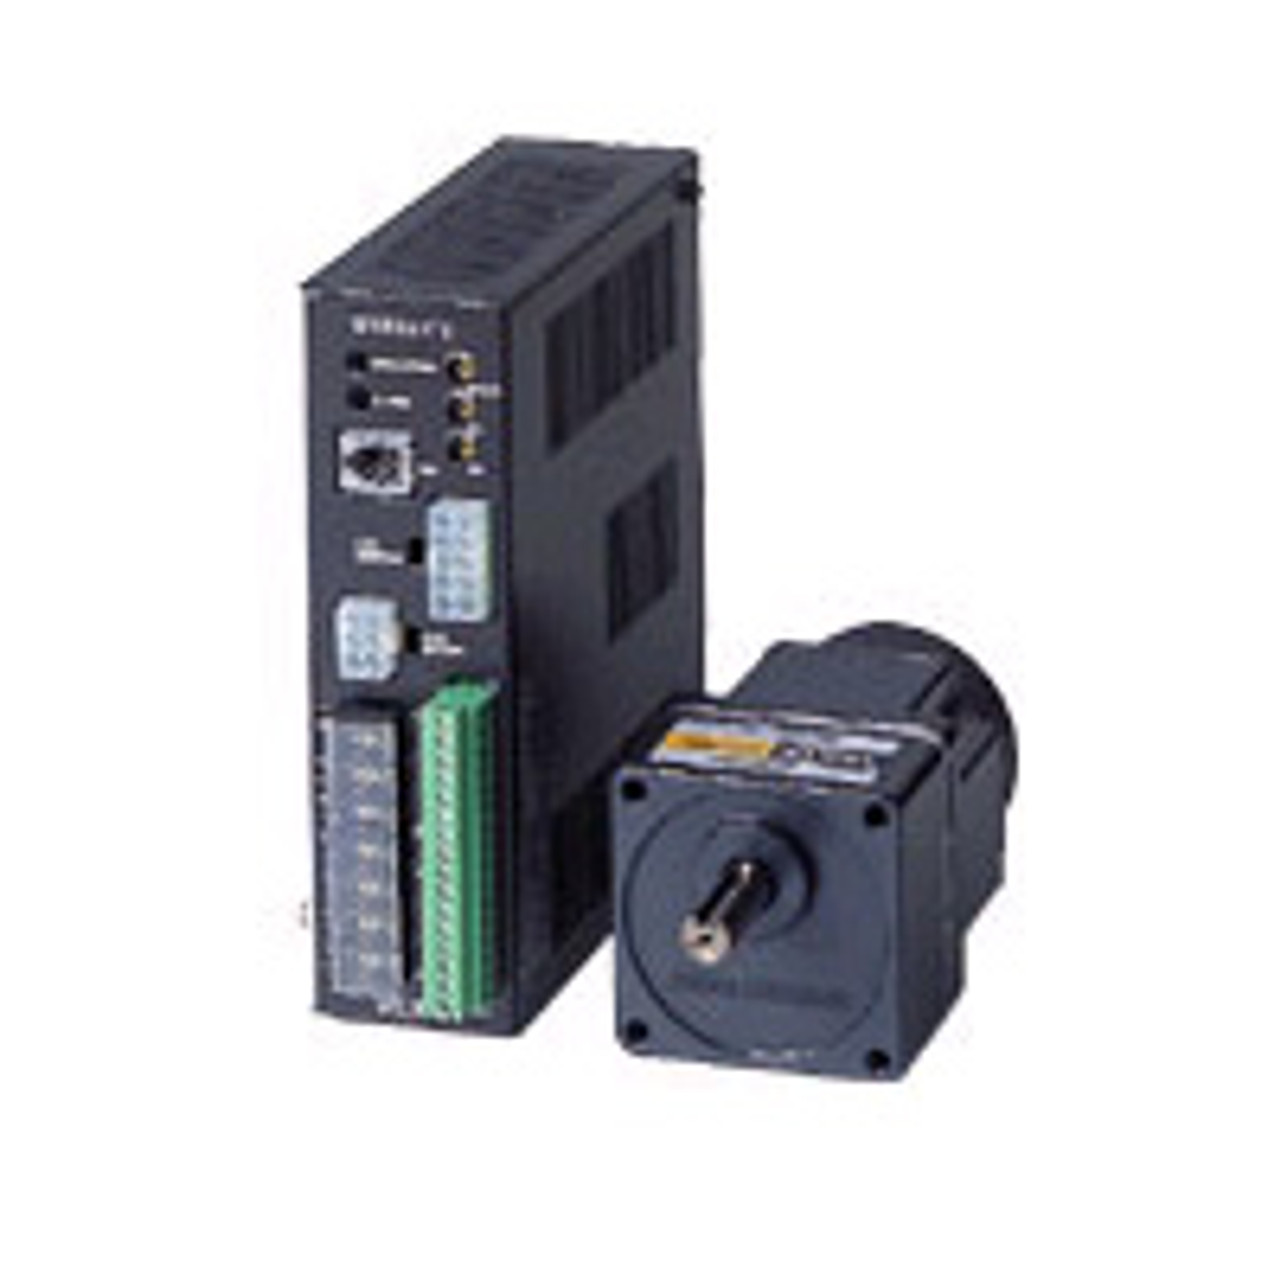 BX230A-20 - Product Image